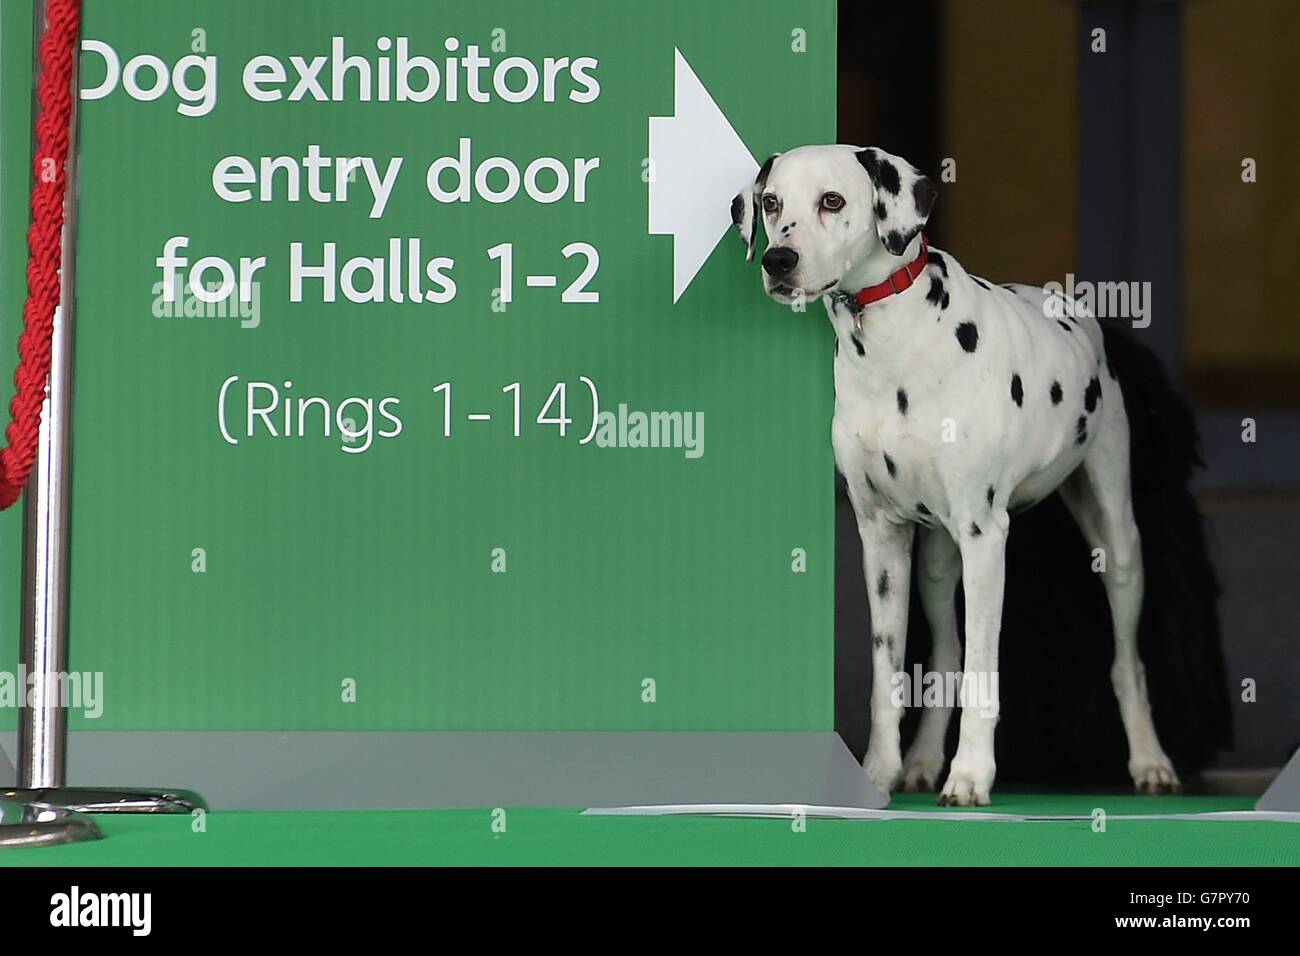 Chippie the Dalmatian during a photocall to launch Crufts 2015 at the NEC, Birmingham. Stock Photo